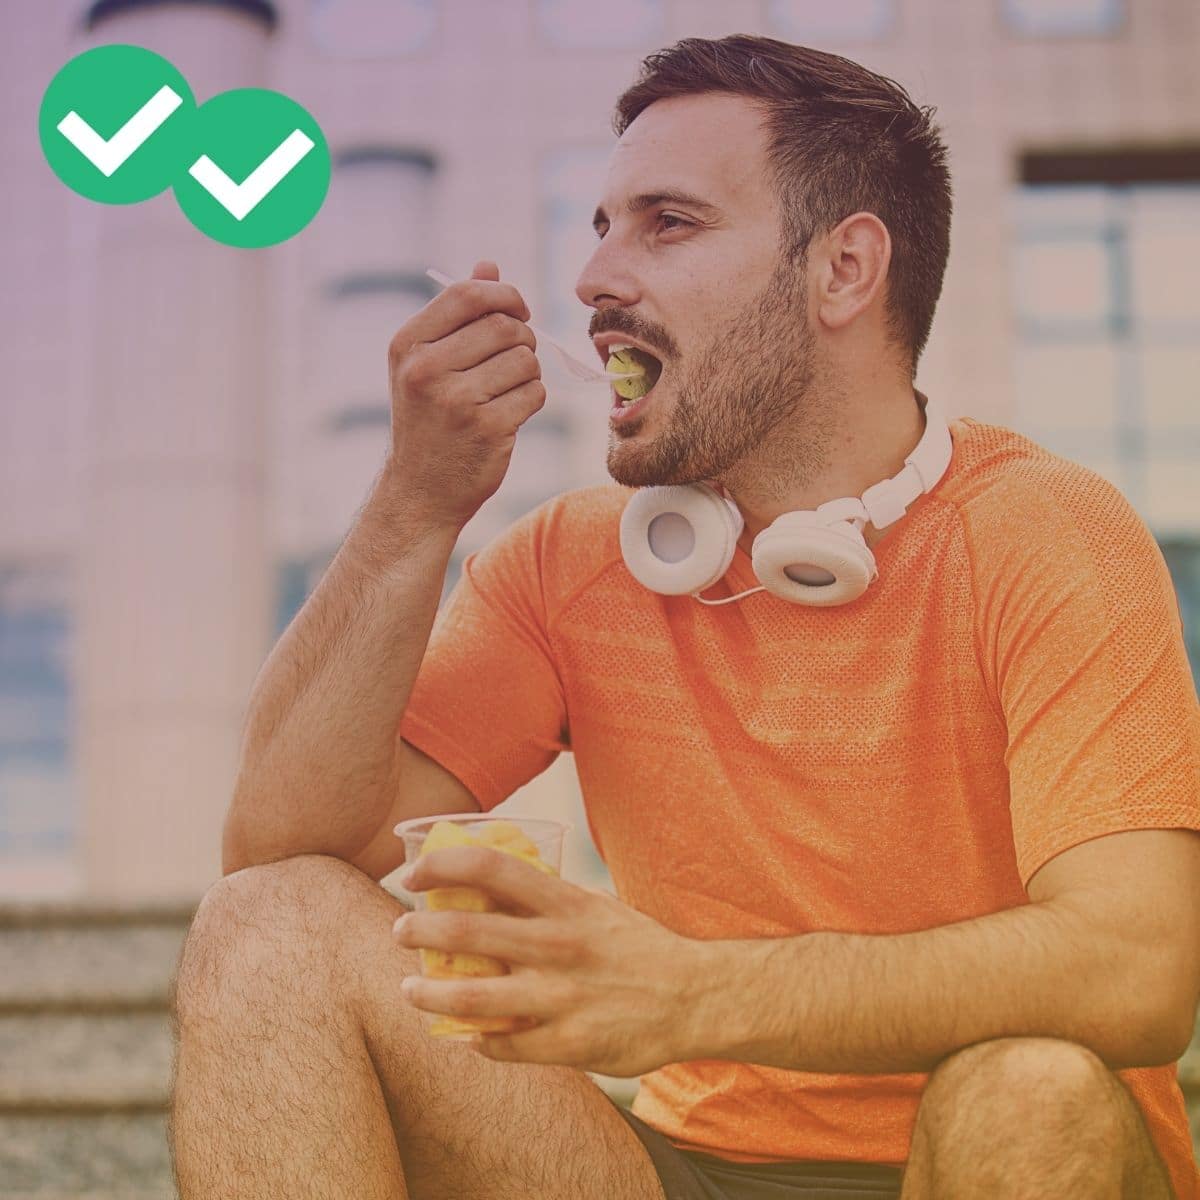 Man eating fruit after exercising to represent MCAT citric acid cycle - image by Magoosh